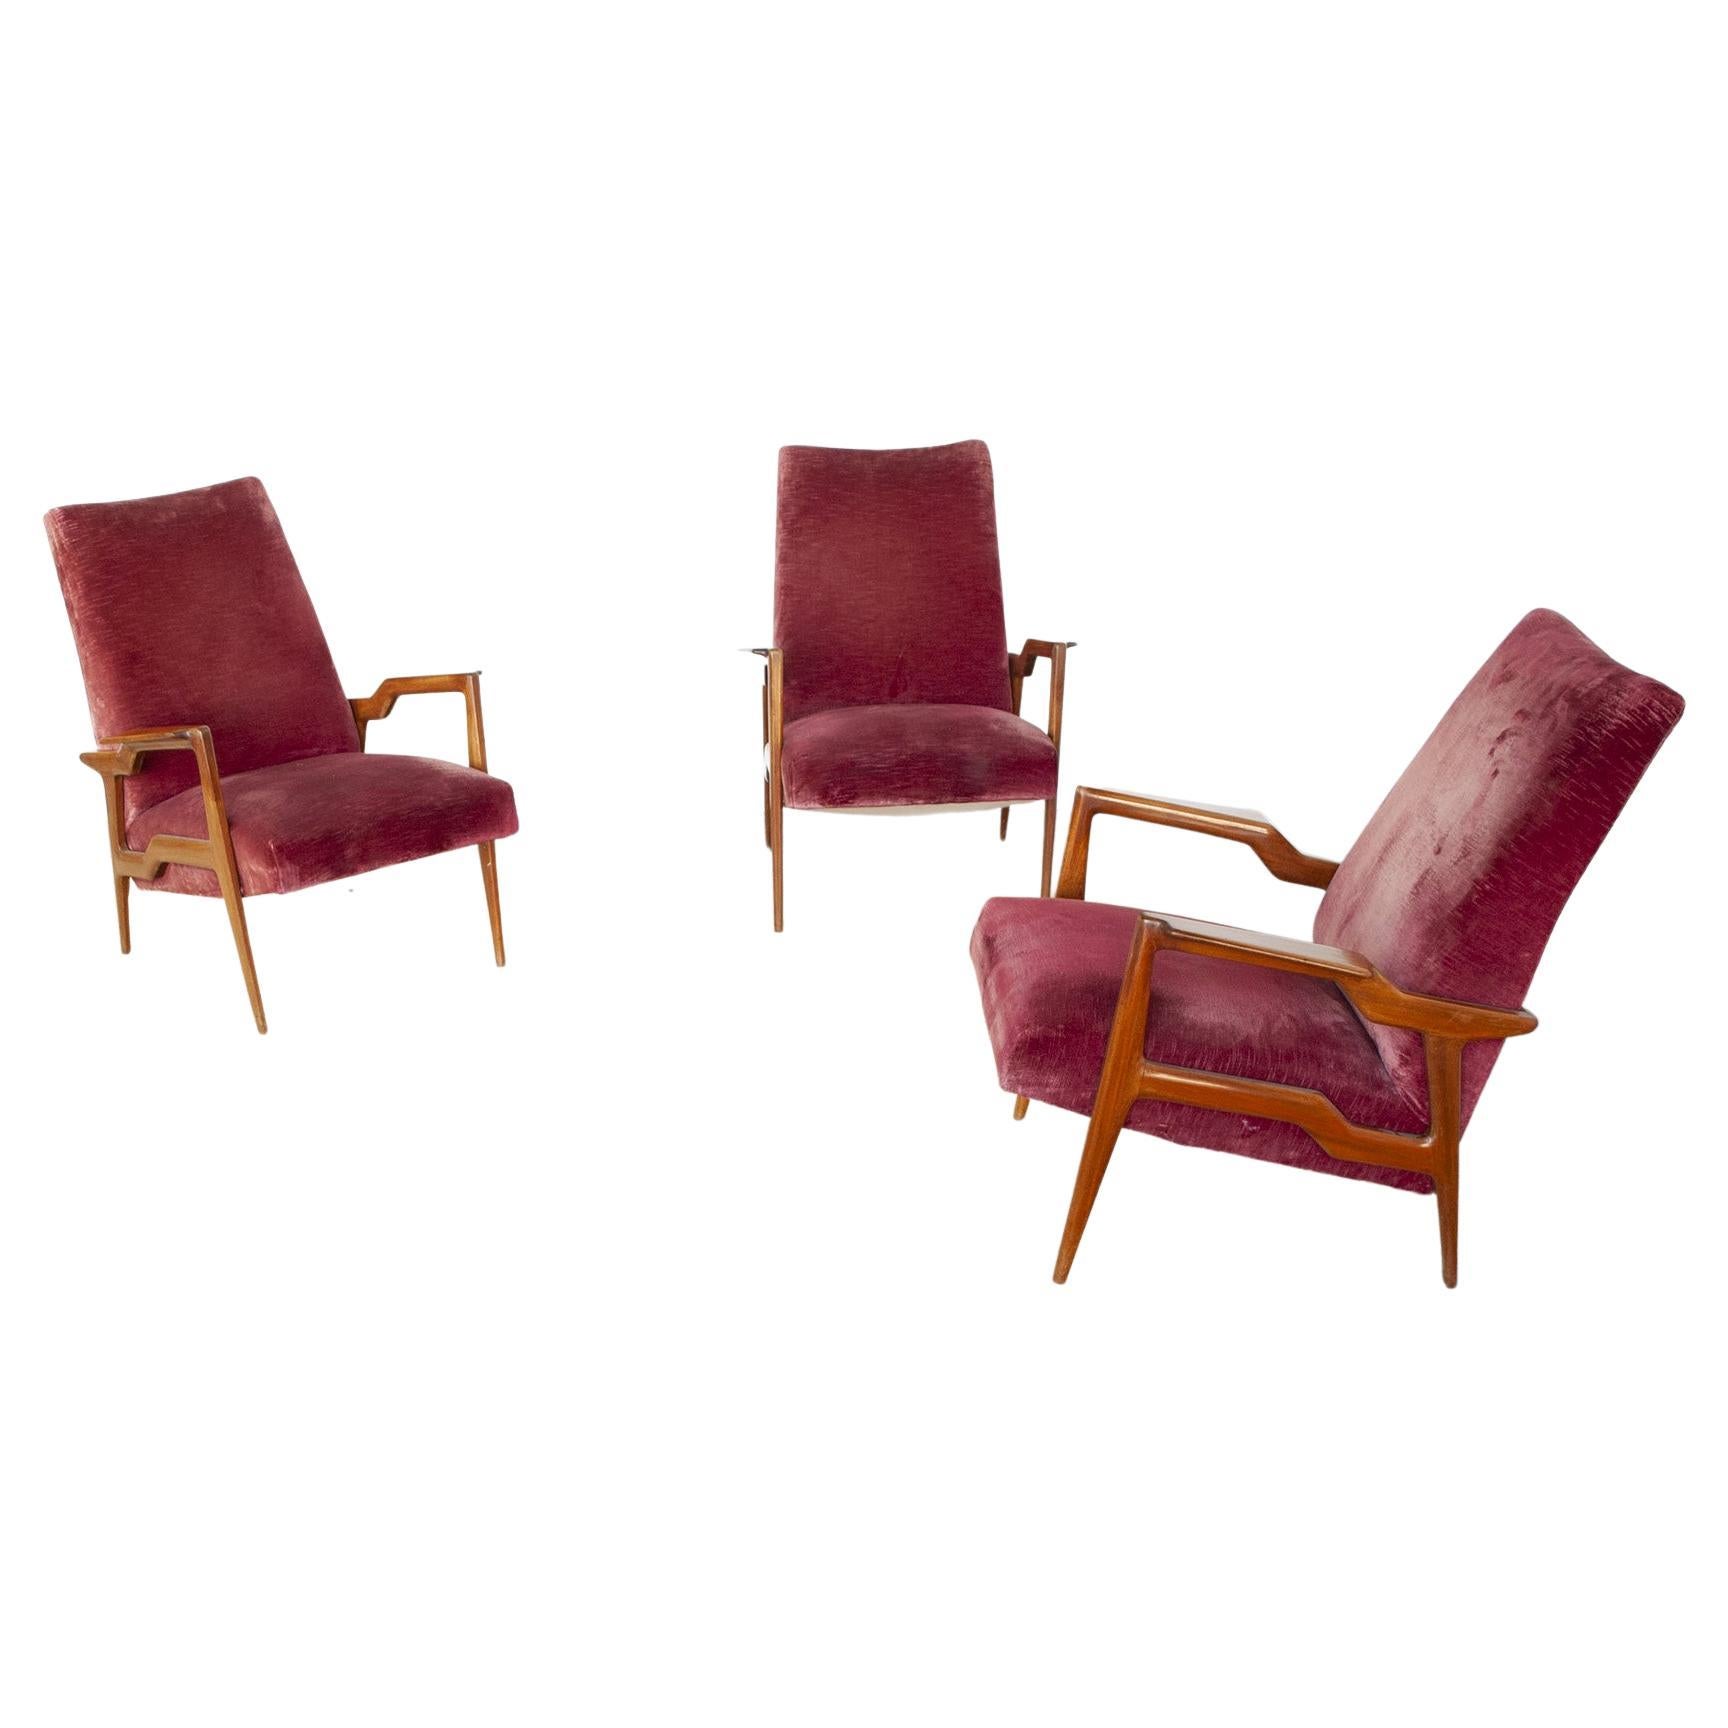 Set of three armchairs worked wood frame covered with original velvet of the time attributable to Ico Parisi late 1950s.

Additional measurements: seat depth 50 cm – back height 57 cm

Domenico (Ico) Parisi was born on September 23, 1916, in